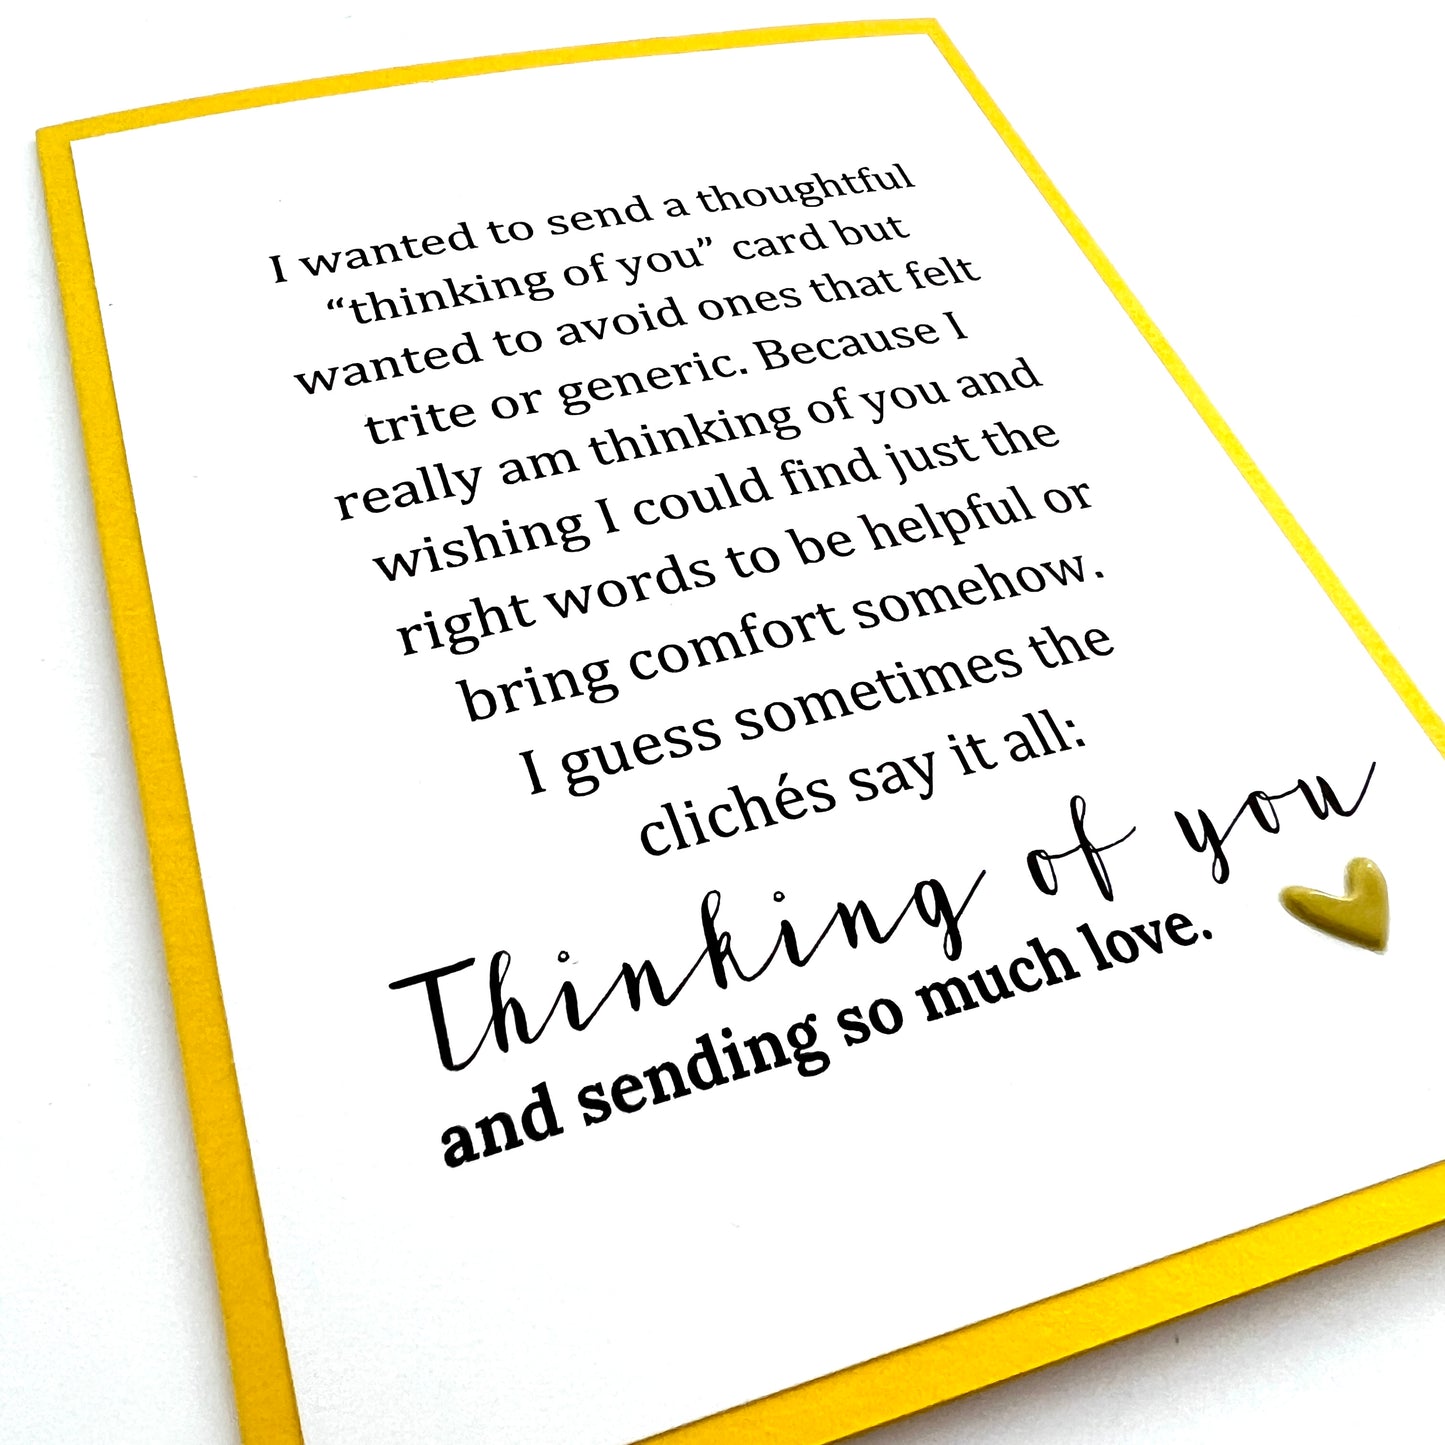 Cliche Thinking of You card